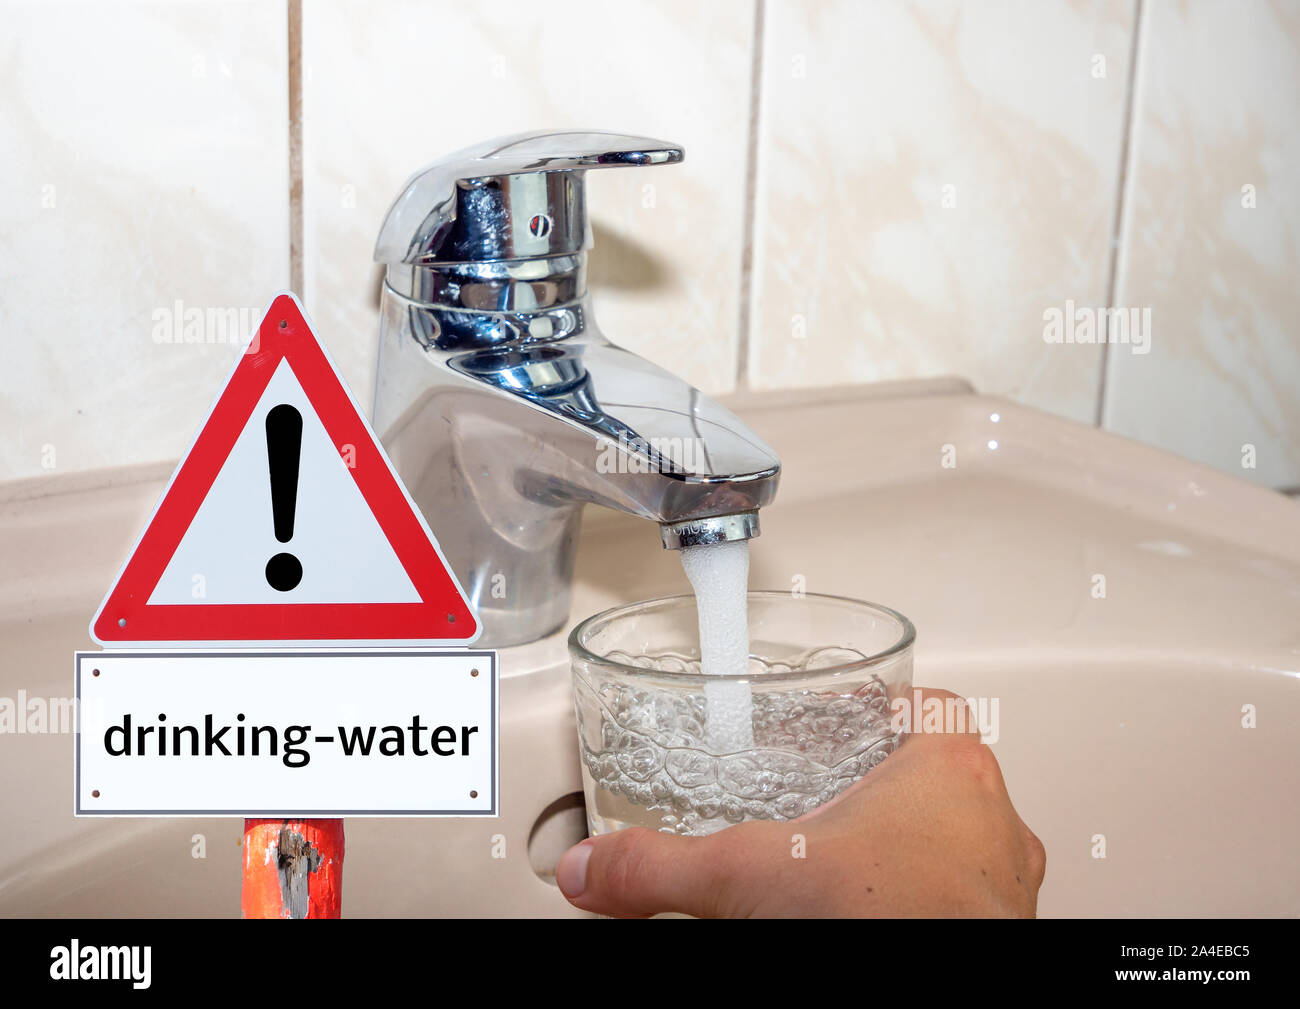 drinking-water sign: water is scarce Stock Photo